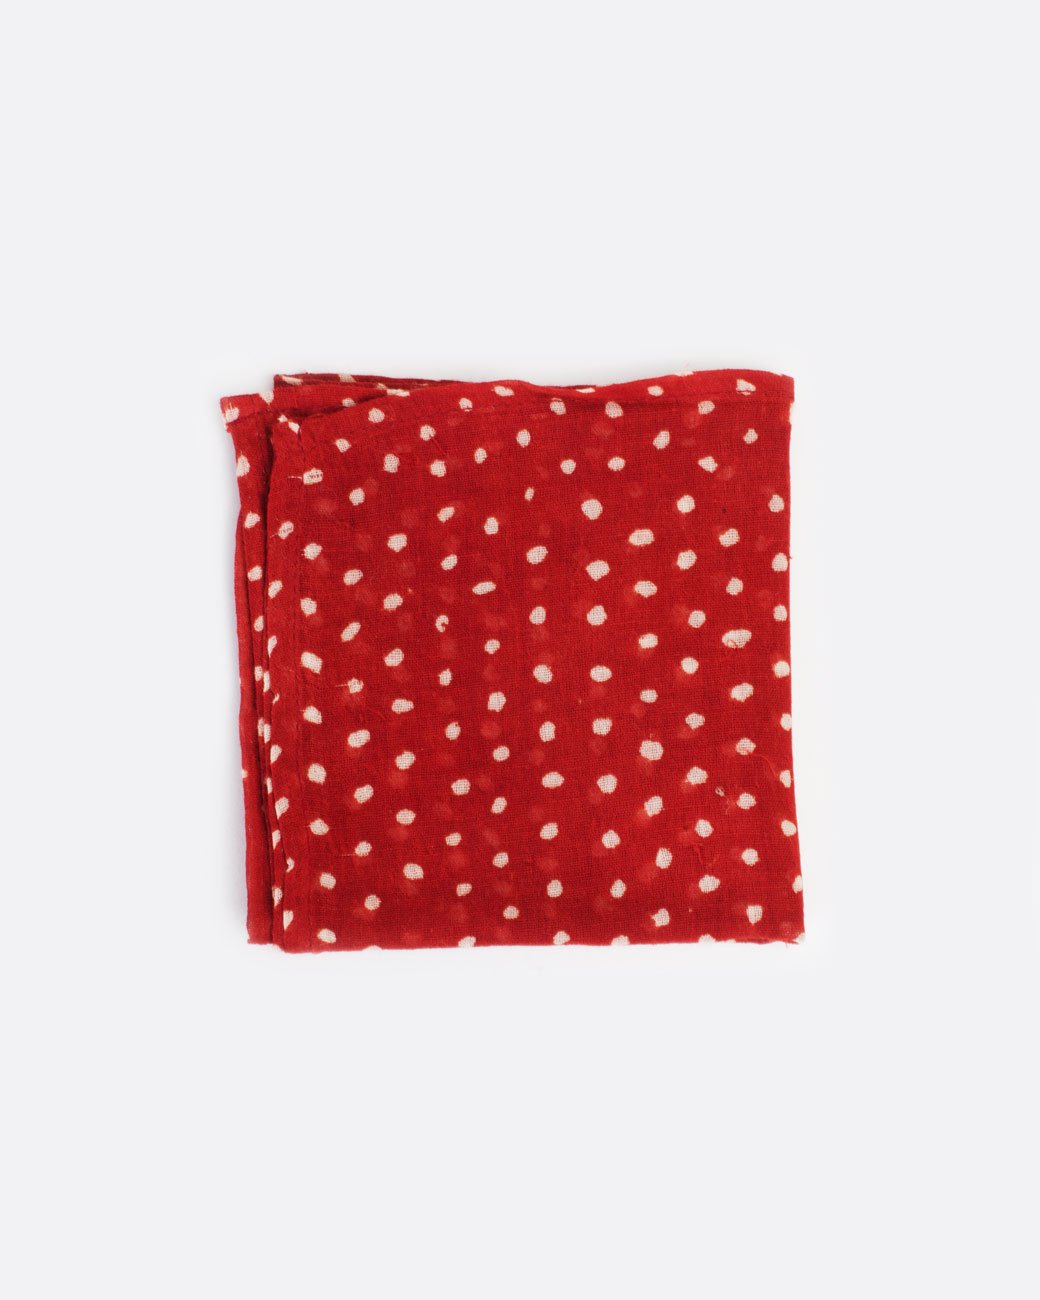 Red bandana with white polka dots, shown folded.